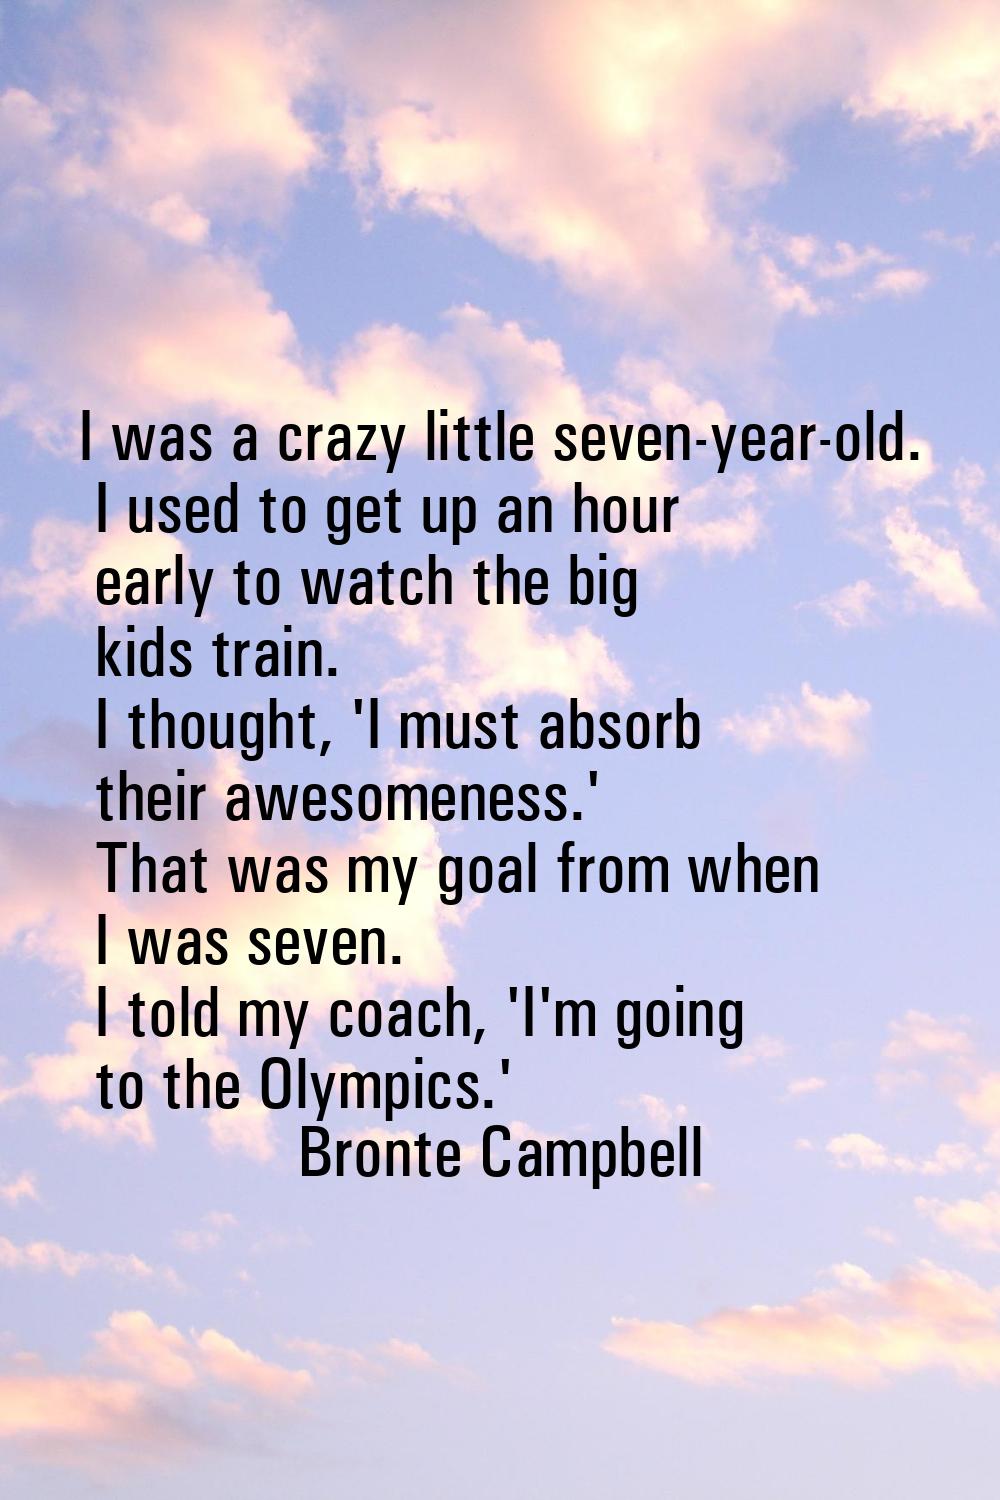 I was a crazy little seven-year-old. I used to get up an hour early to watch the big kids train. I 